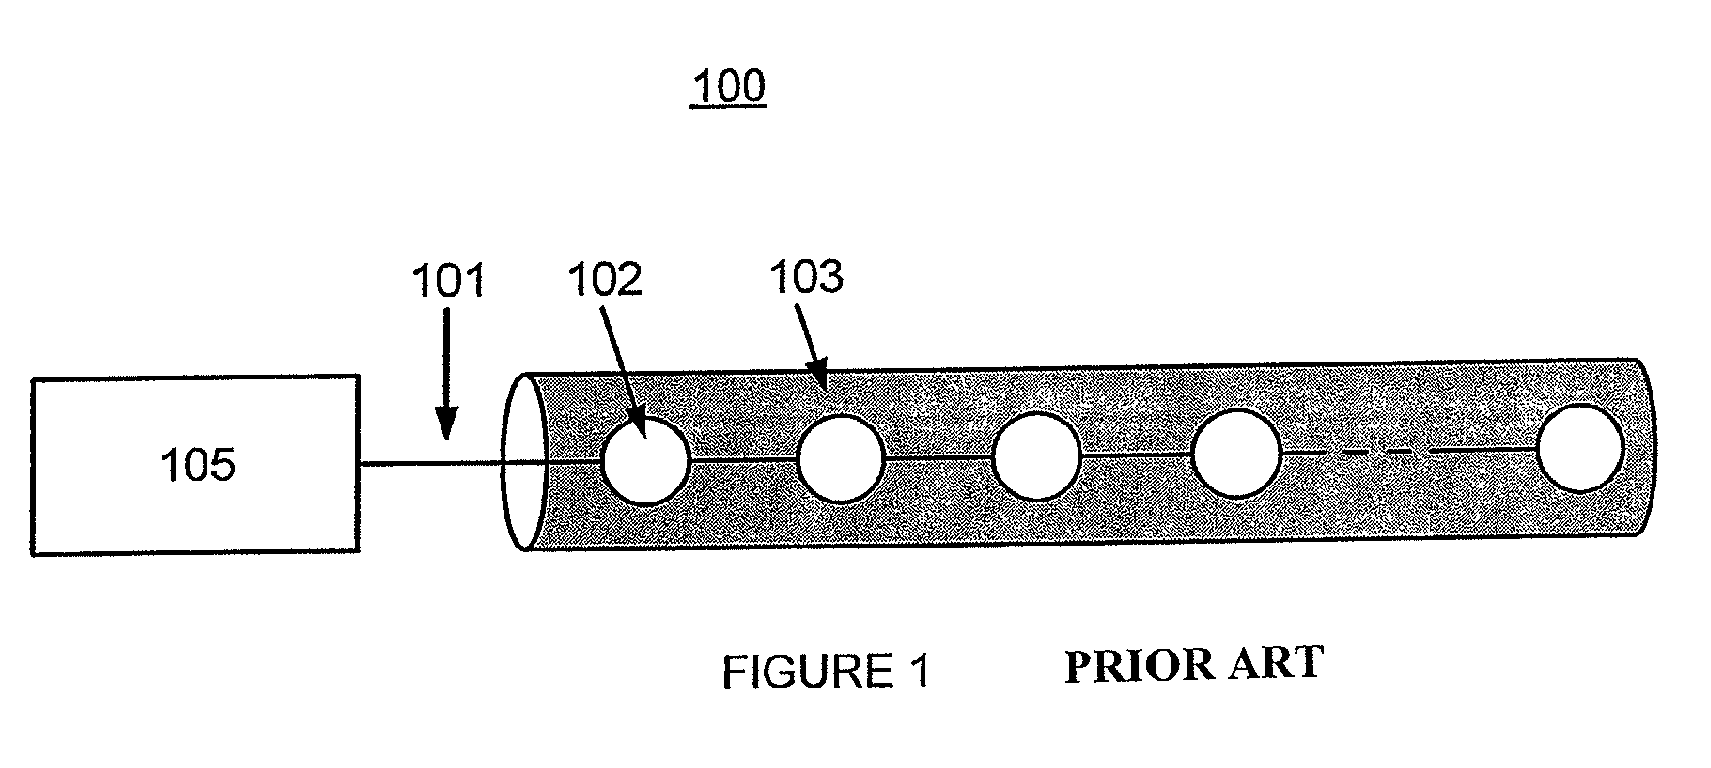 Integrally formed single piece light emitting diode light wire